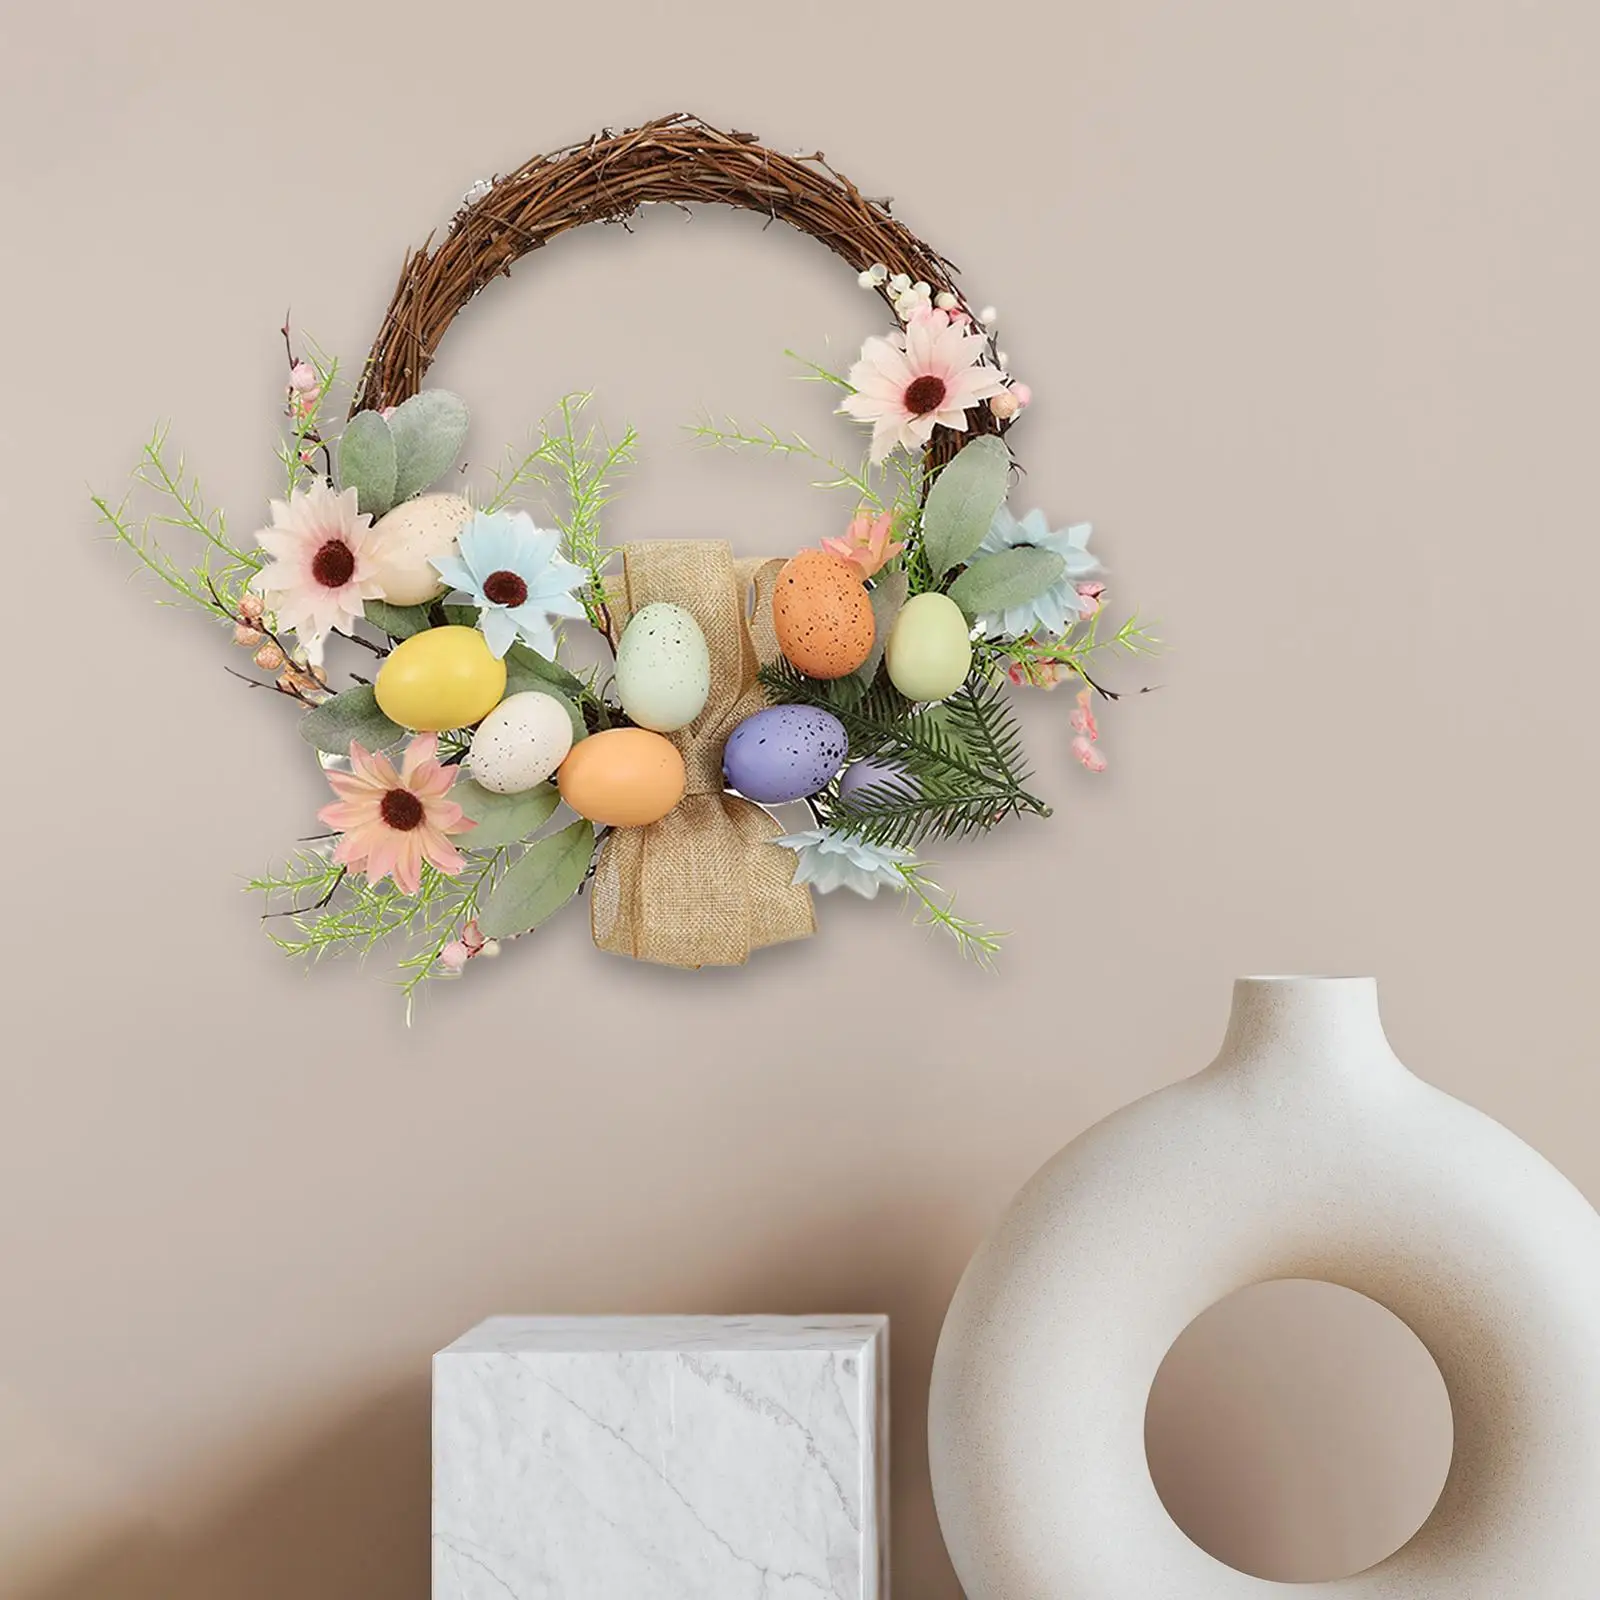 16inch Easter Wreath Photo Prop Ornament Greenery Leaves Easter Decorations Wall Artificial Flower Garland for Front Door Window